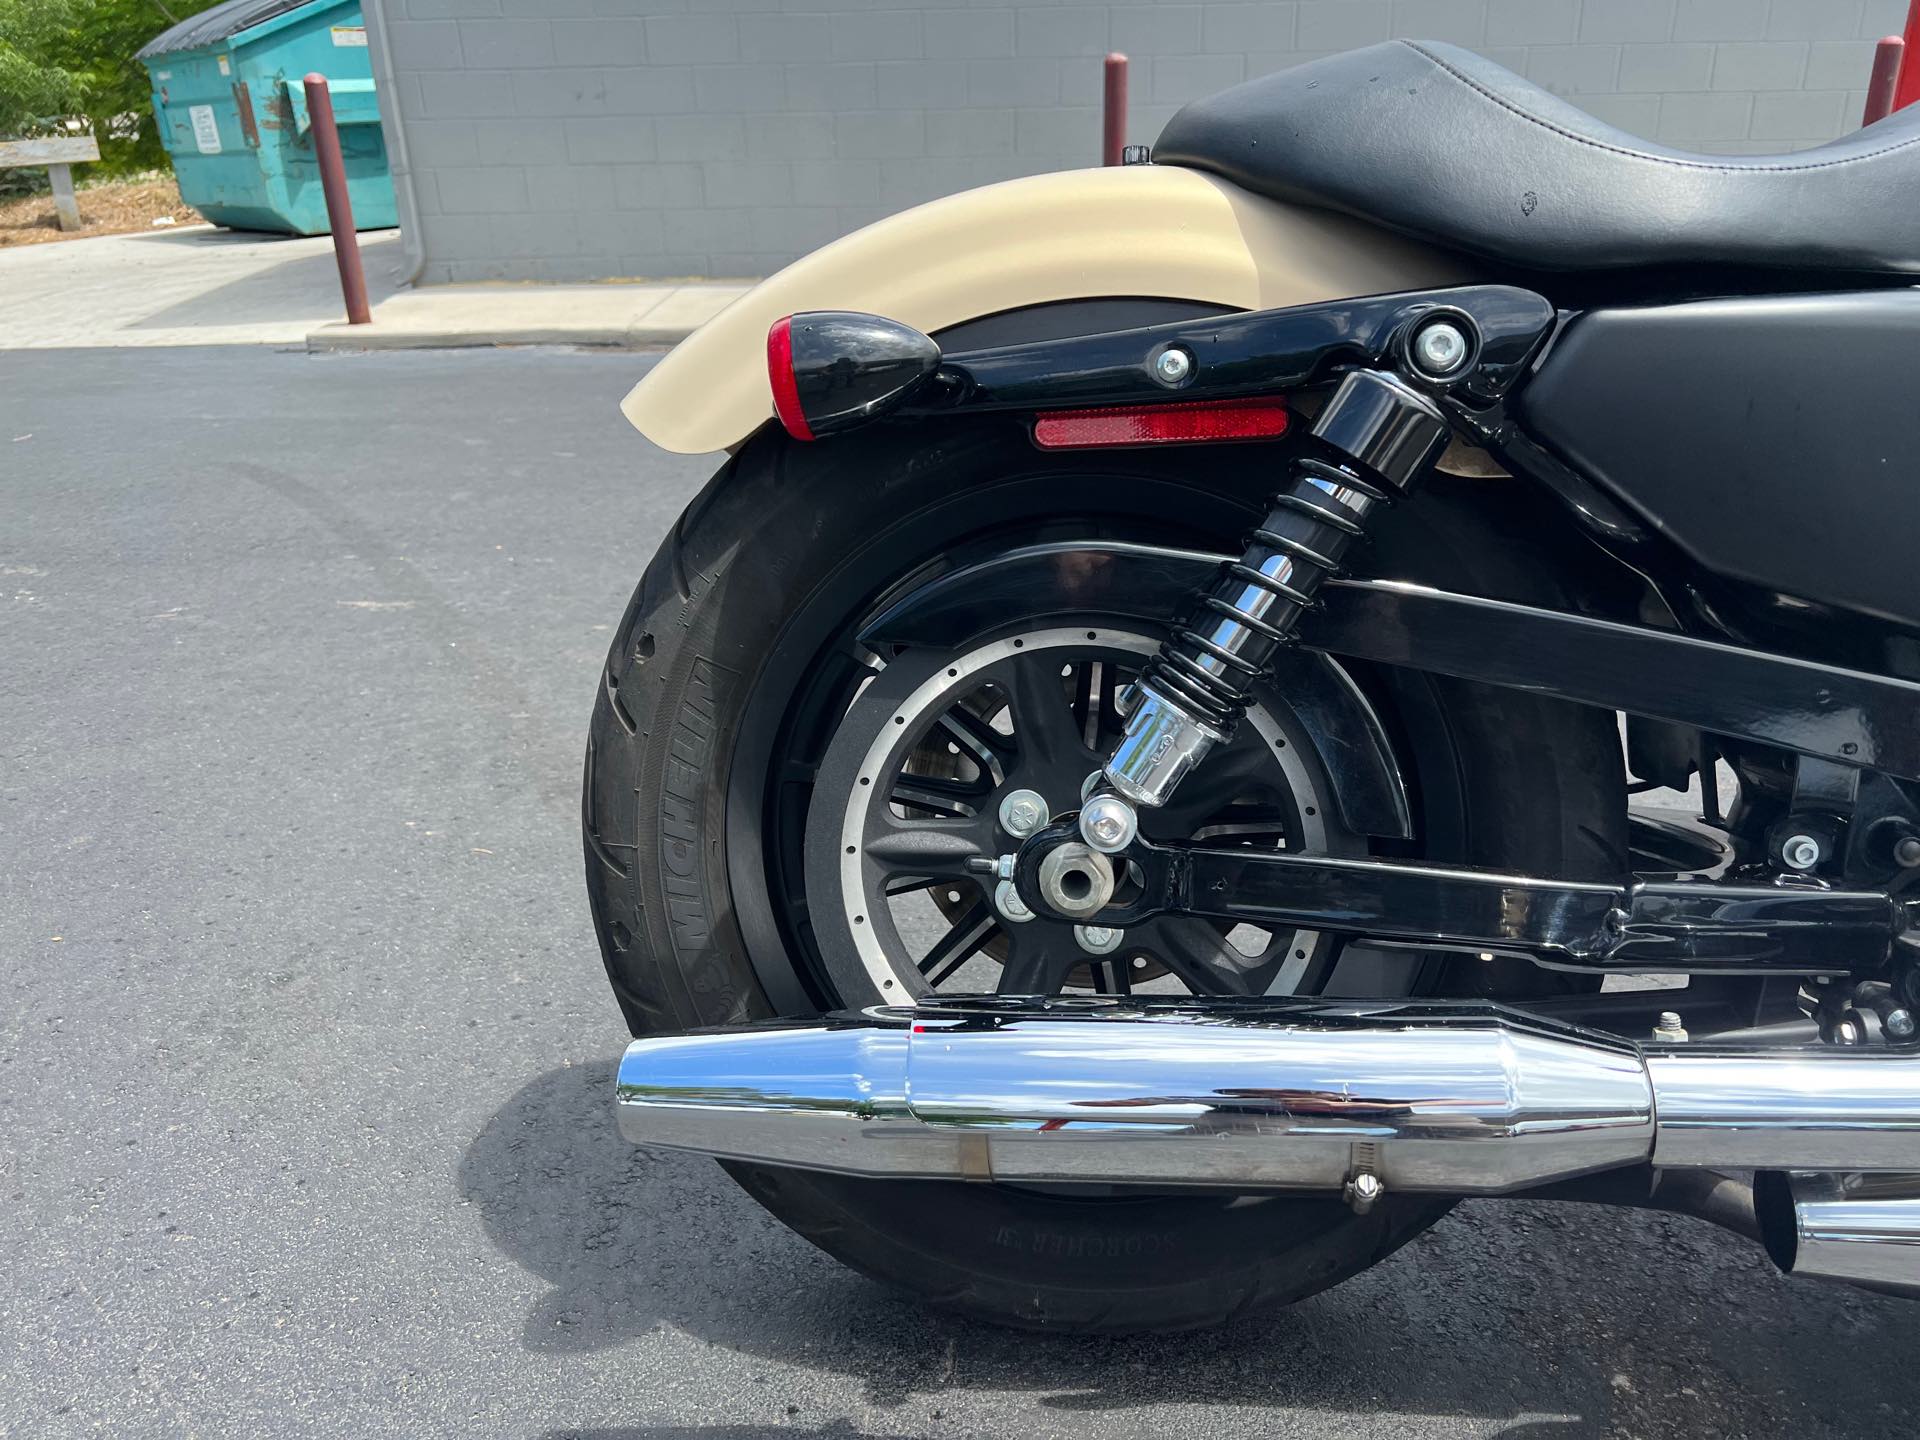 2014 Harley-Davidson Sportster Iron 883 at Aces Motorcycles - Fort Collins